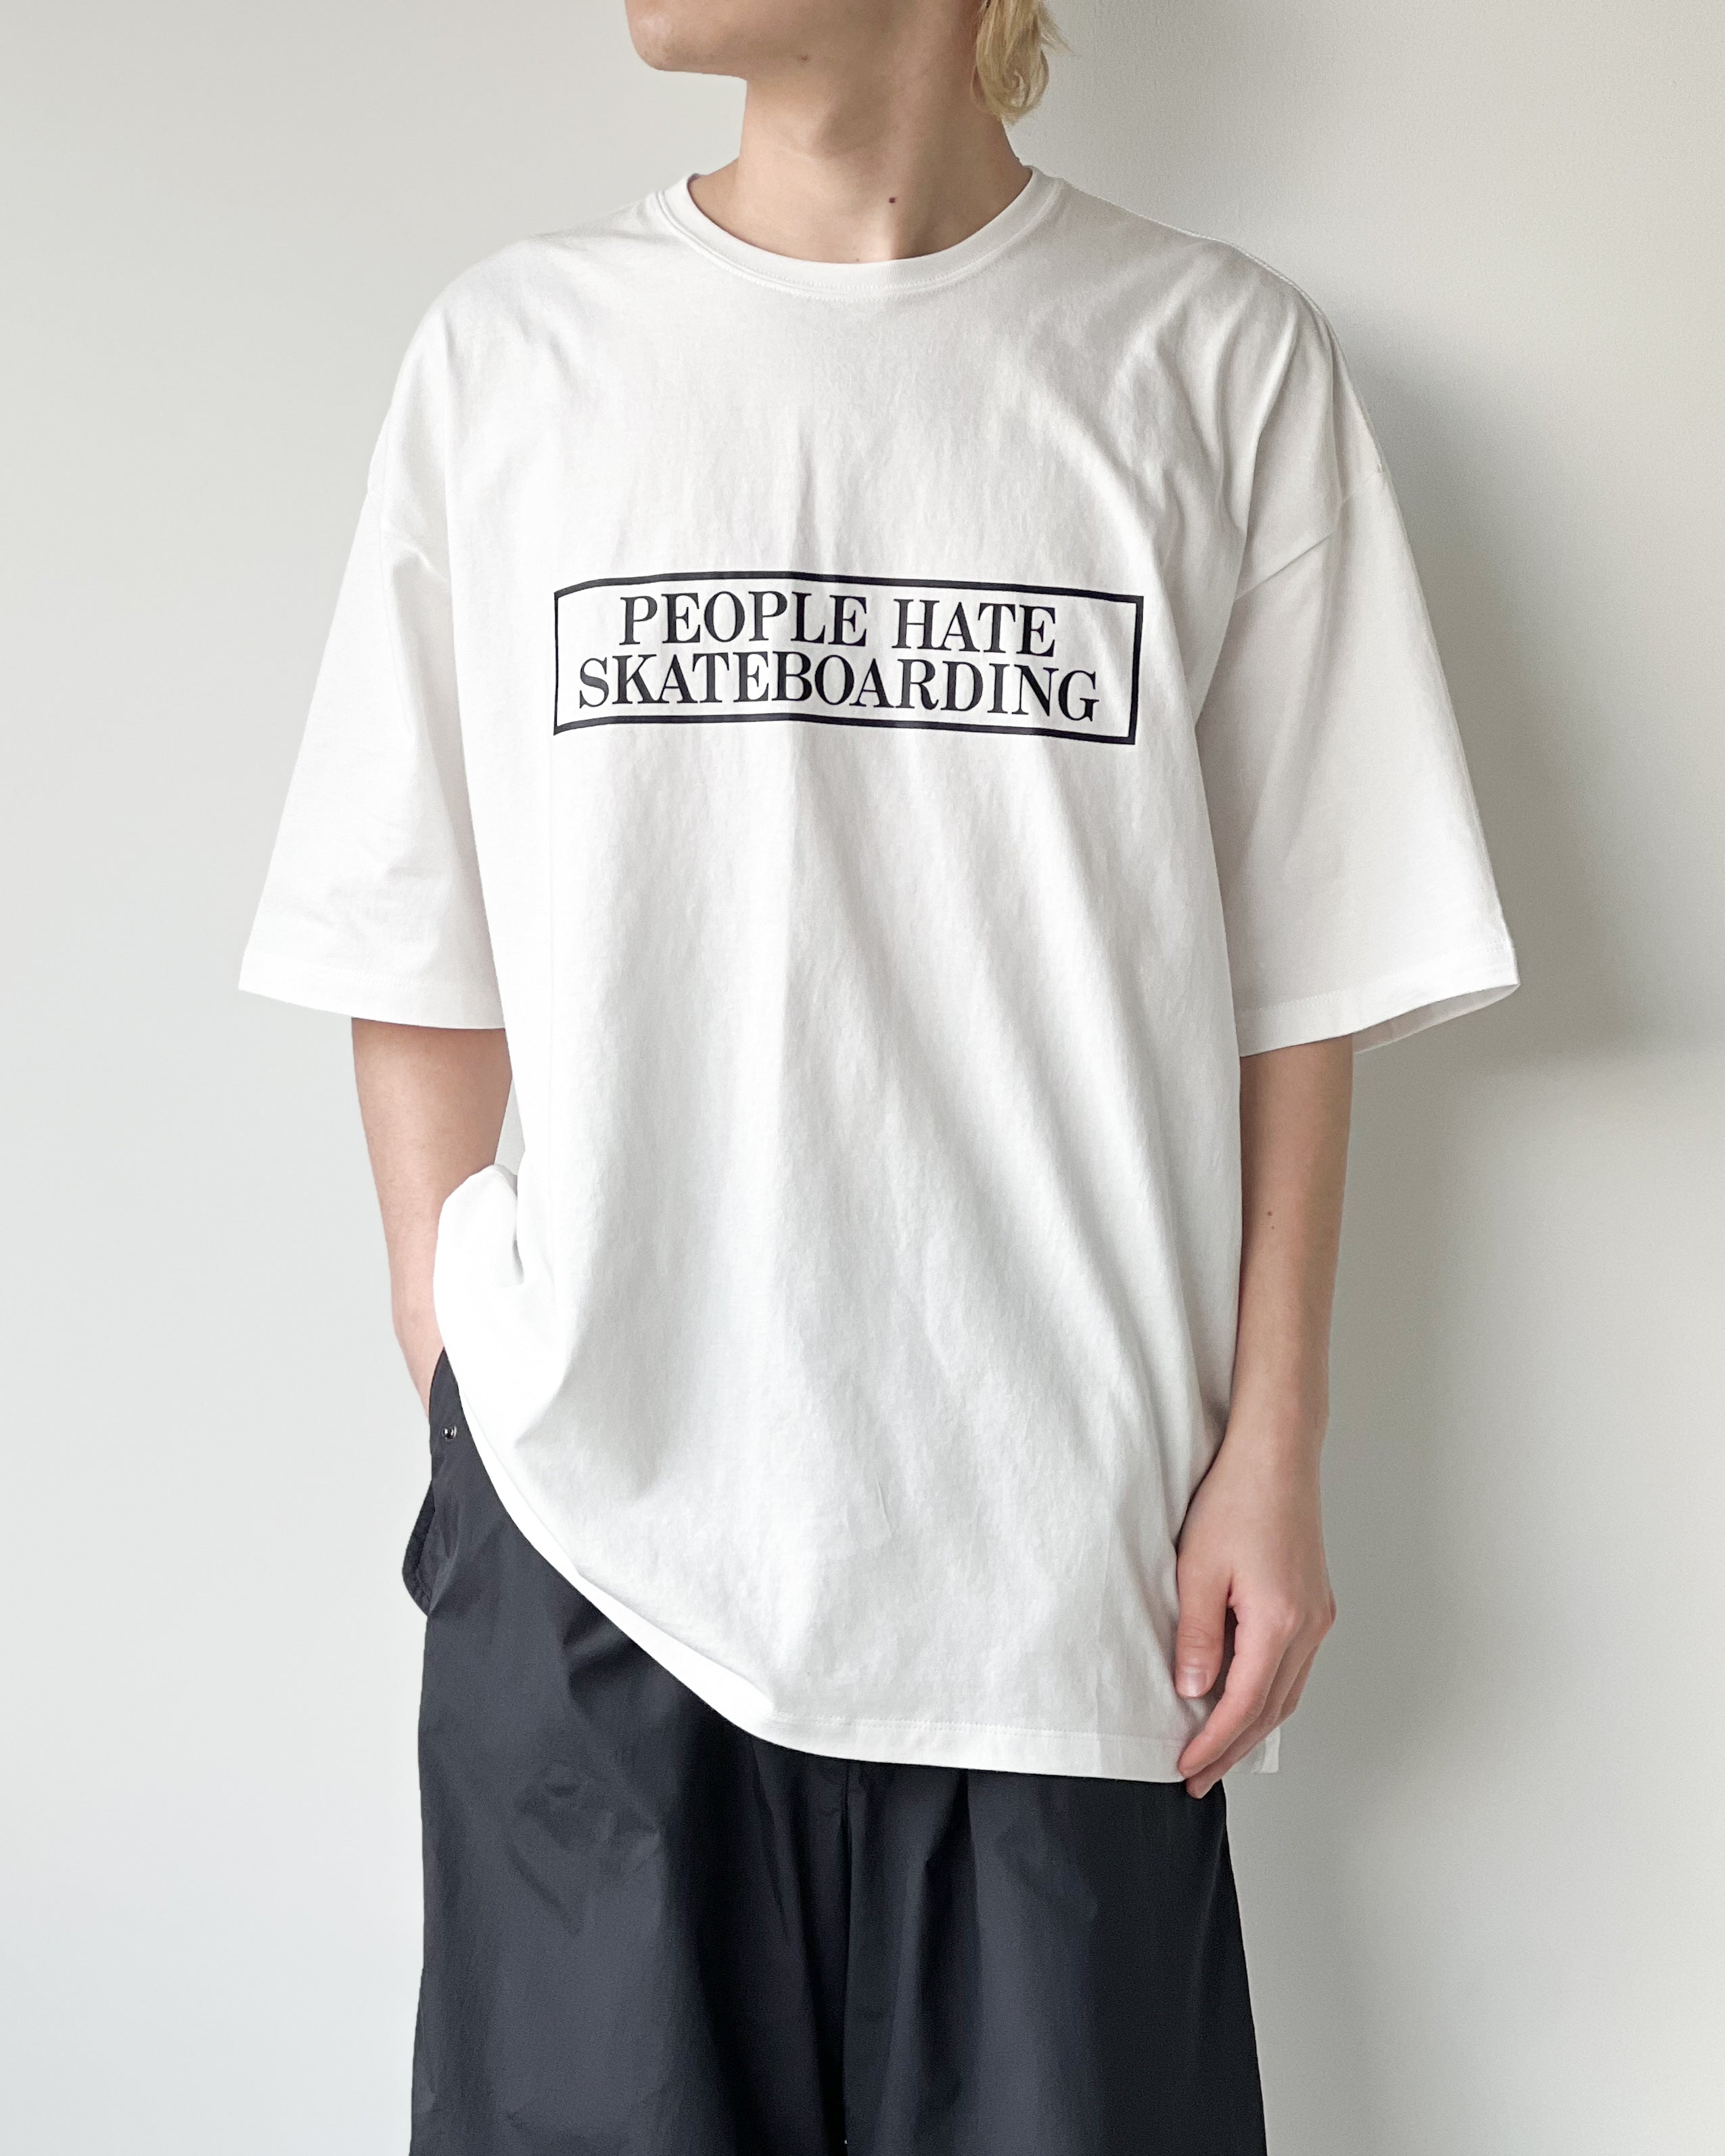 【TIGHTBOOTH】PEOPLE HATE SKATE T-SHIRT - WHITE